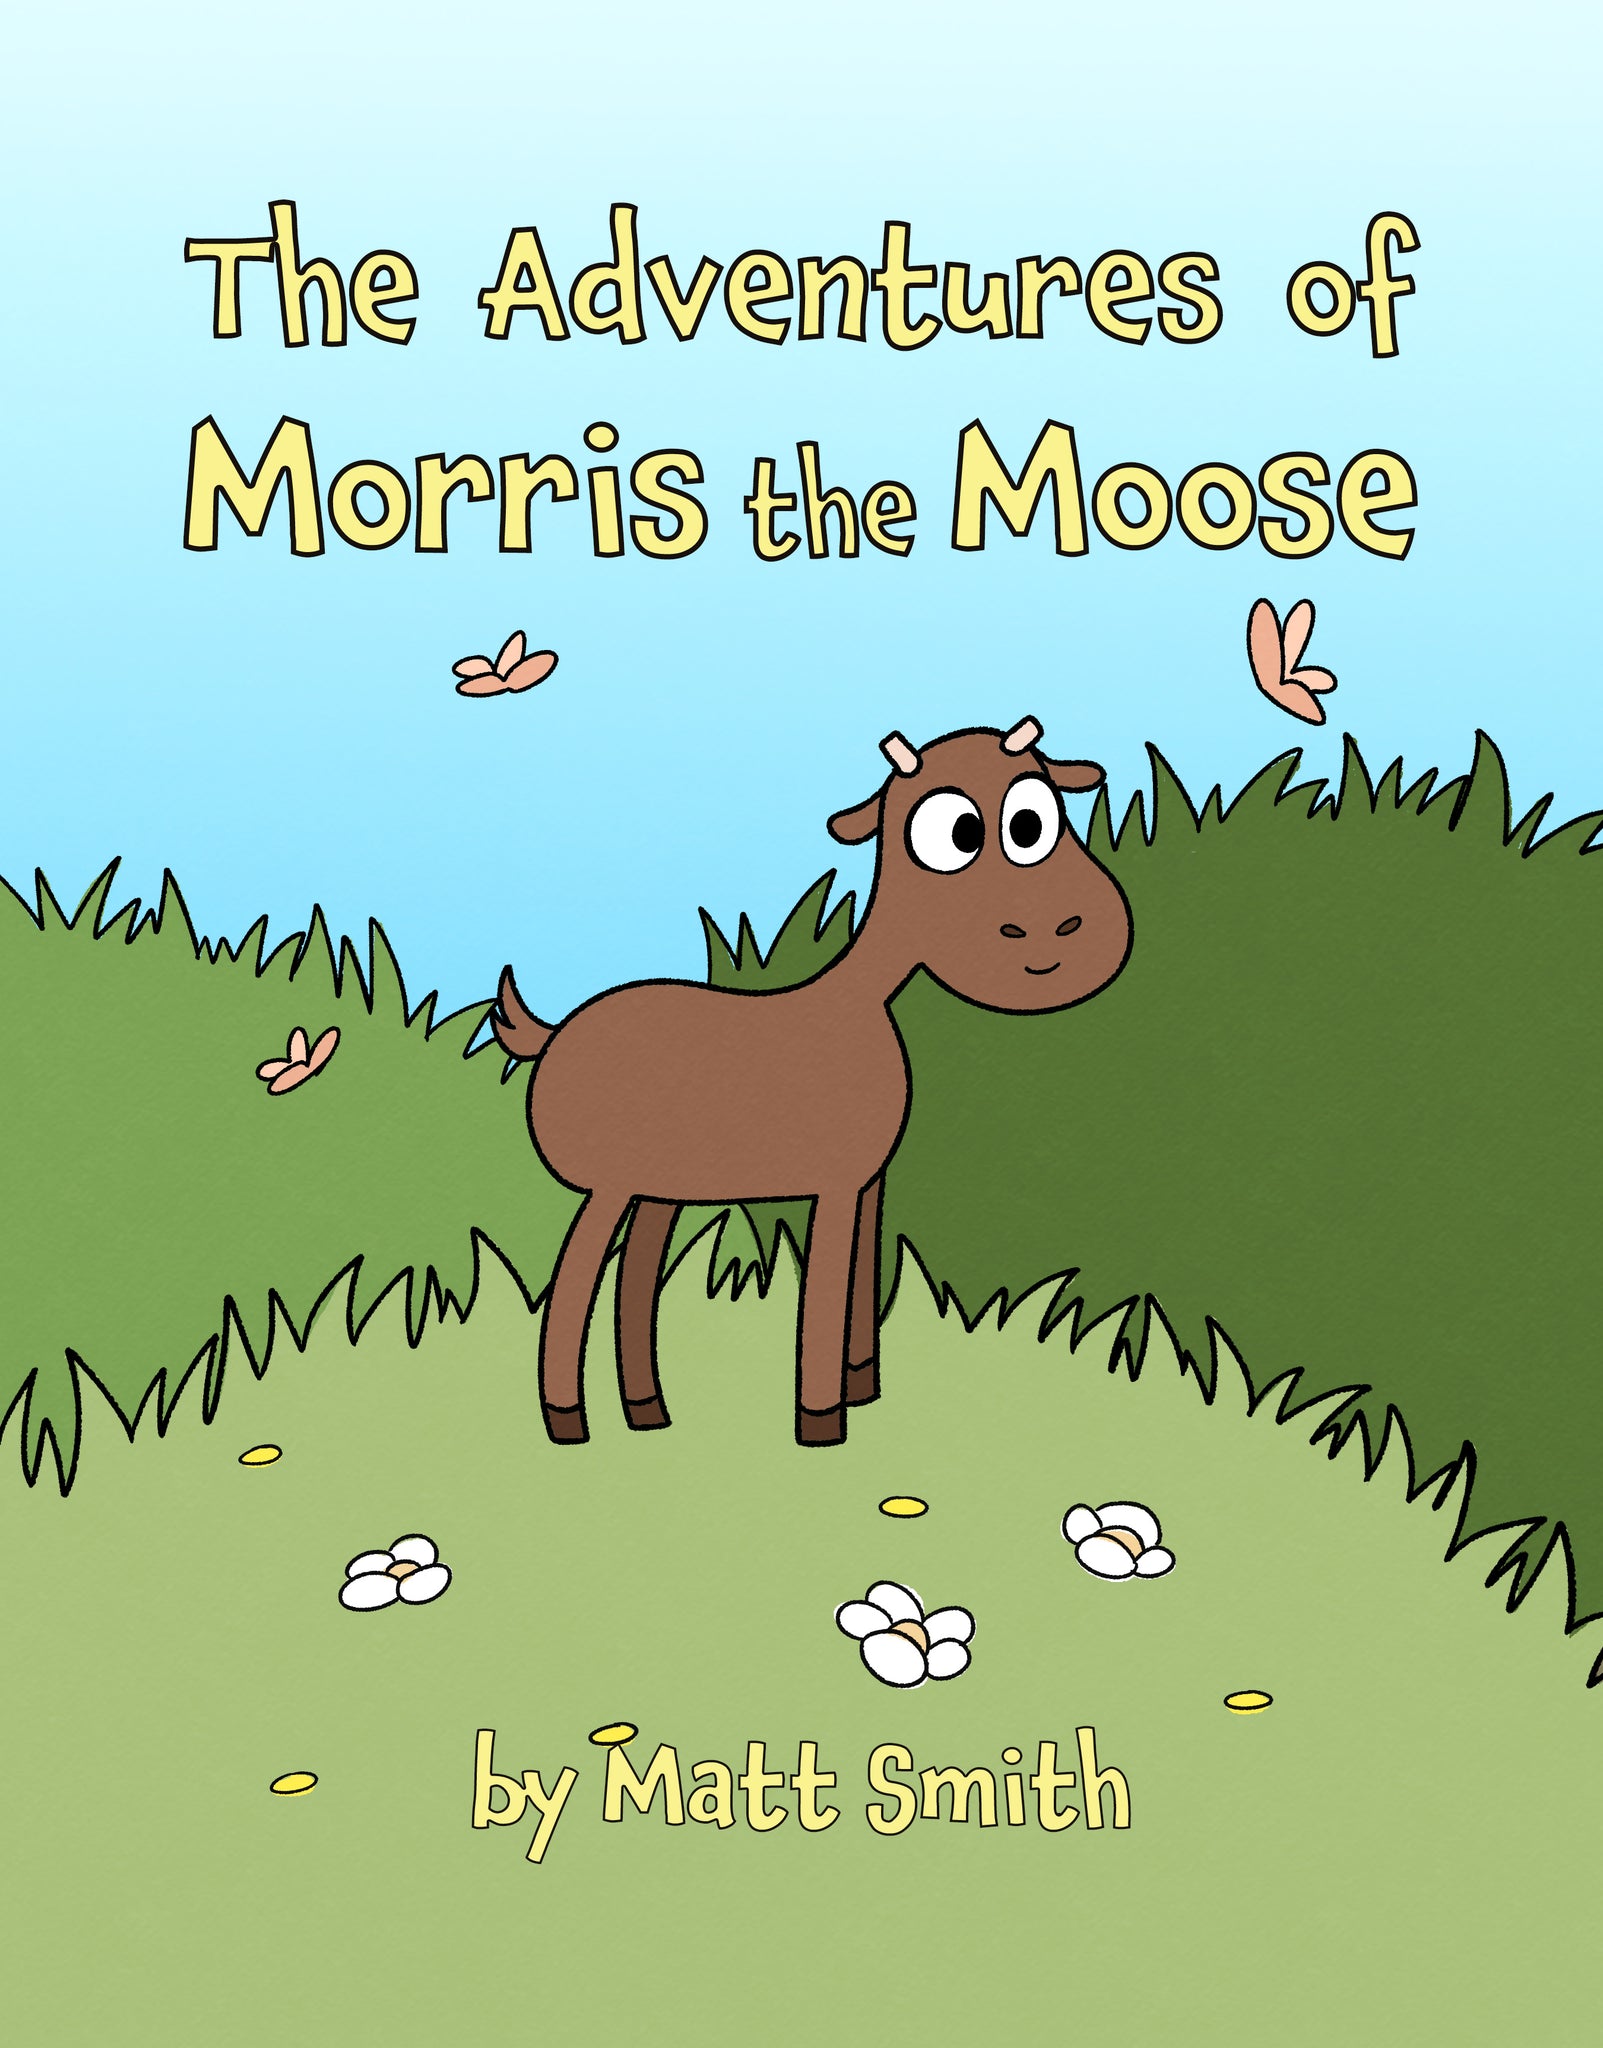 The Adventures of Morris the Moose